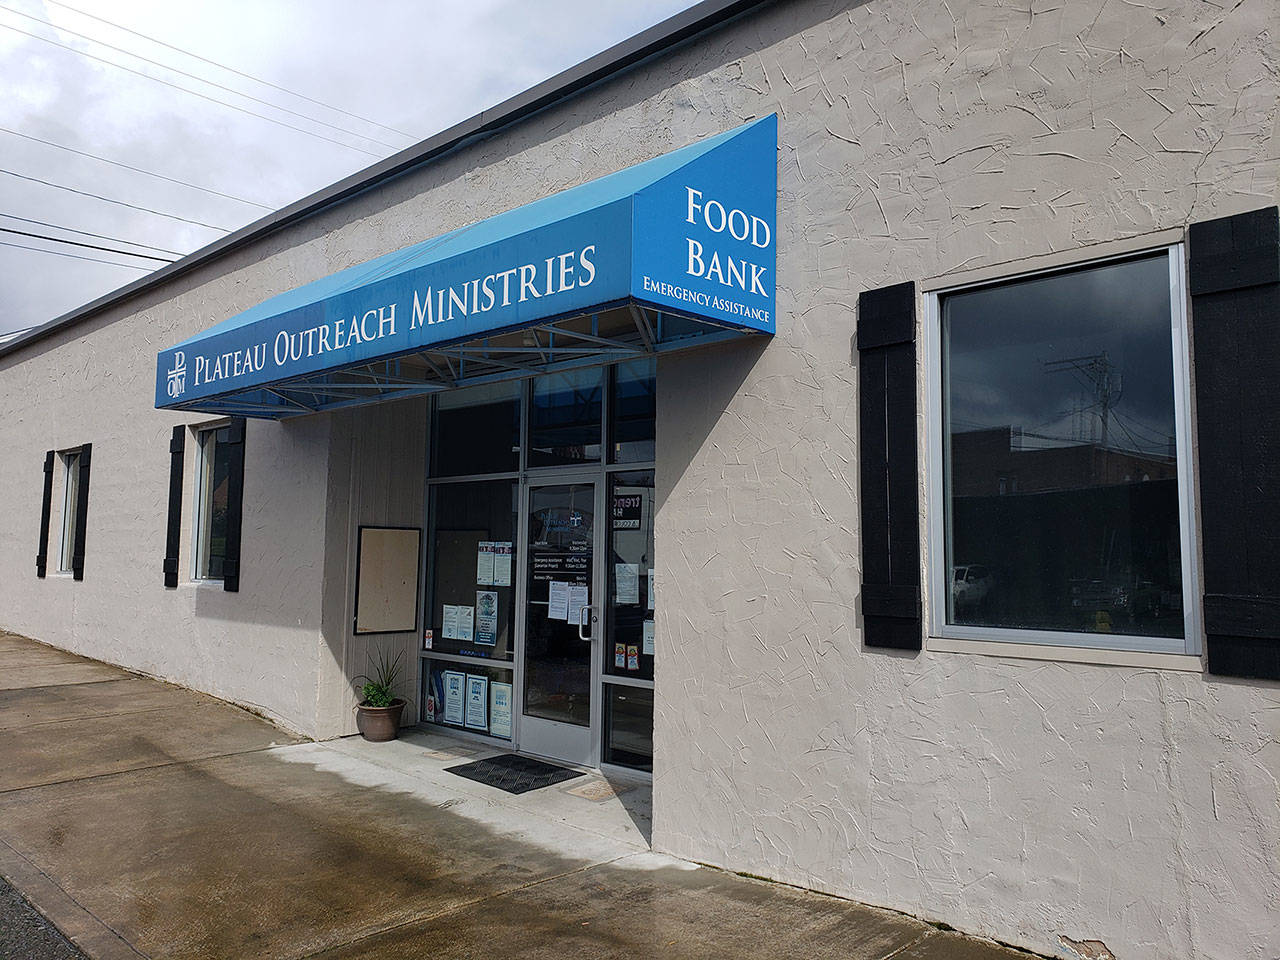 In addition to continuing its Samaritan Services, Plateau Outreach Ministries is also keeping its food bank open on Wednesdays from 9 a.m. to noon. Photo by Ray Miller-Still